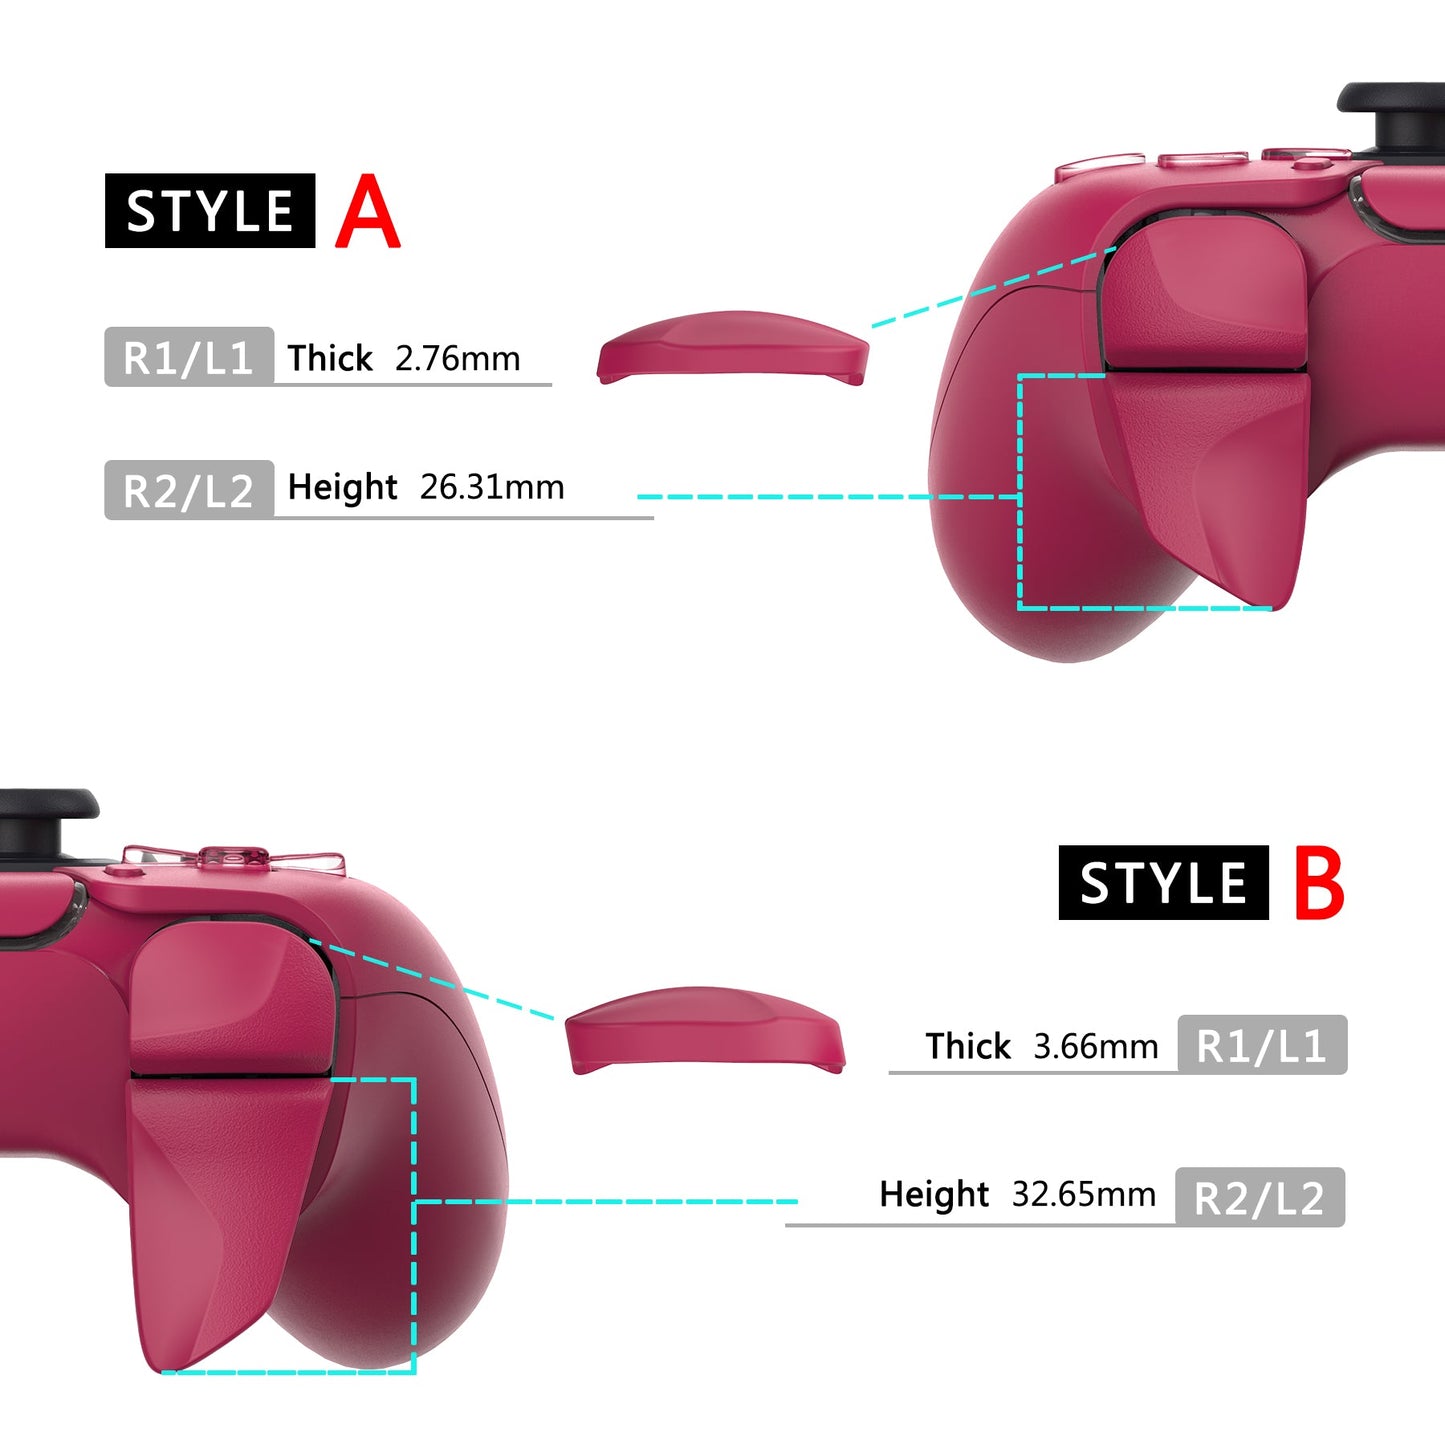 PlayVital Cosmic Red 2 Pair Shoulder Buttons Extension Triggers for PS5 Controller, Game Improvement Adjusters for PS5 Controller, Bumper Trigger Extenders for PS5 Controller - PFPJ048 PlayVital